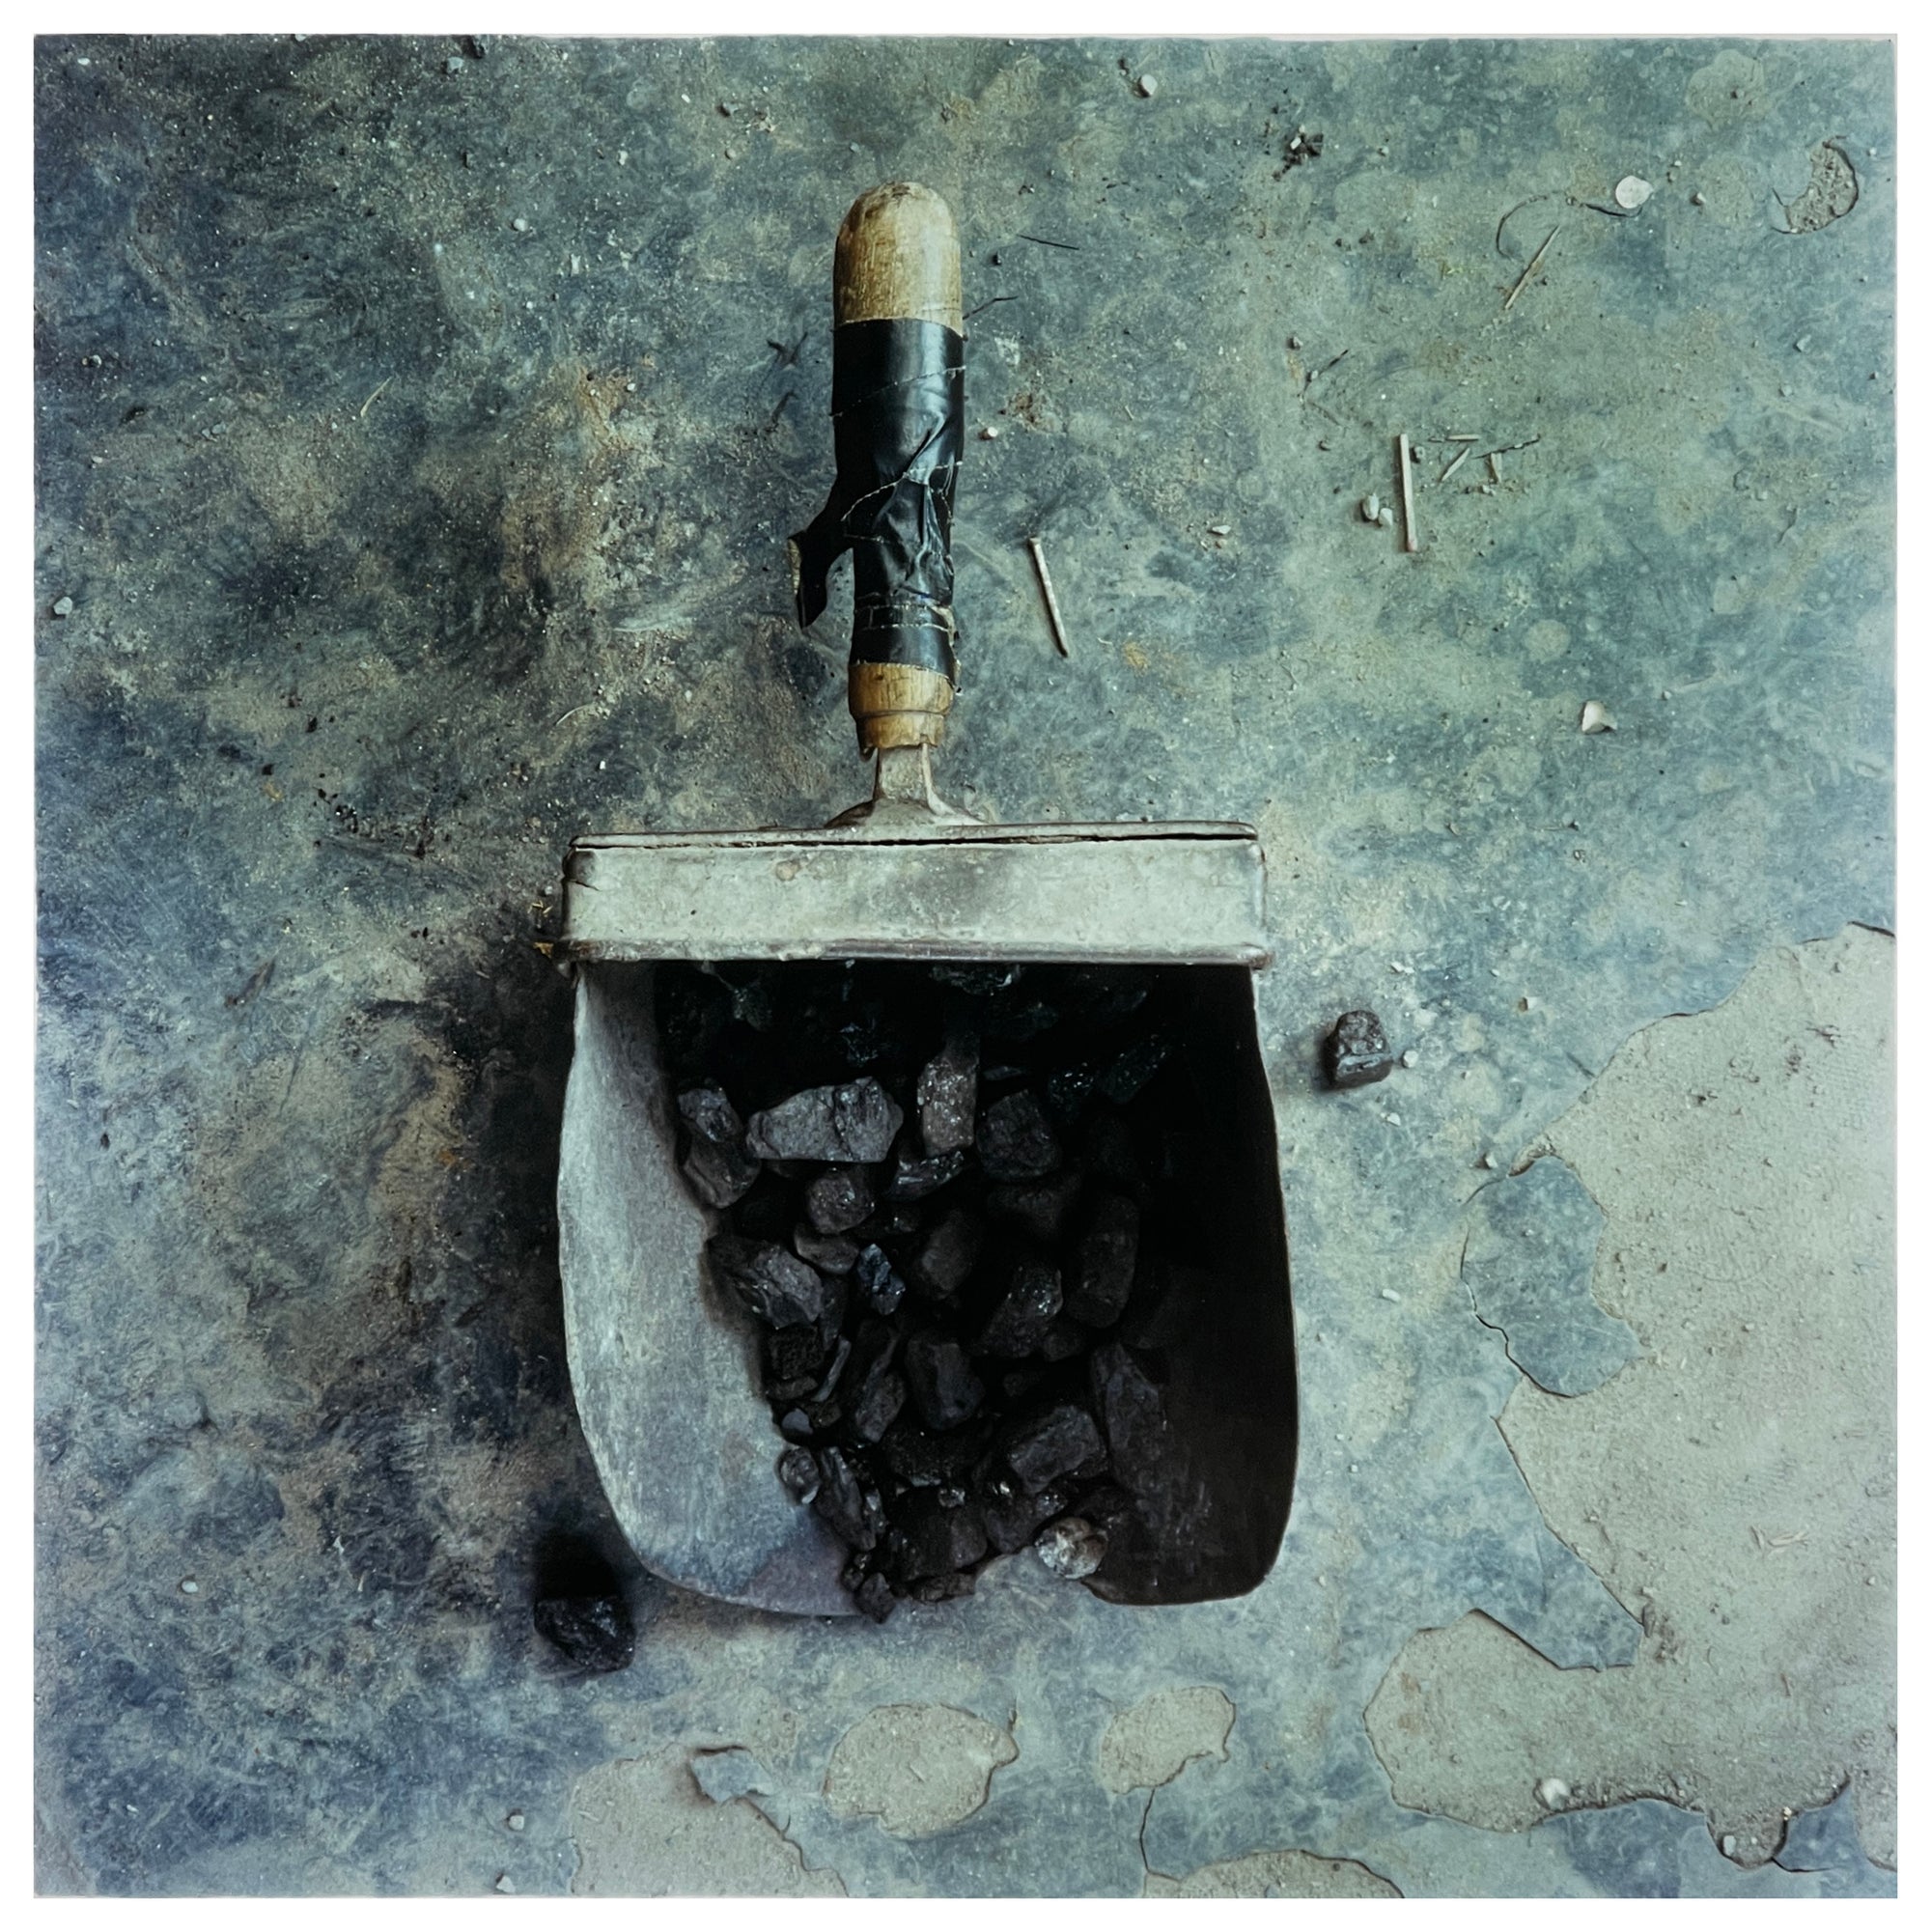 A photograph of a battered coal scuttle on the floor filled with coal, with its wooden handle taped. The coal scuttle sits on grey broken flooring. Photographer Richard Heeps